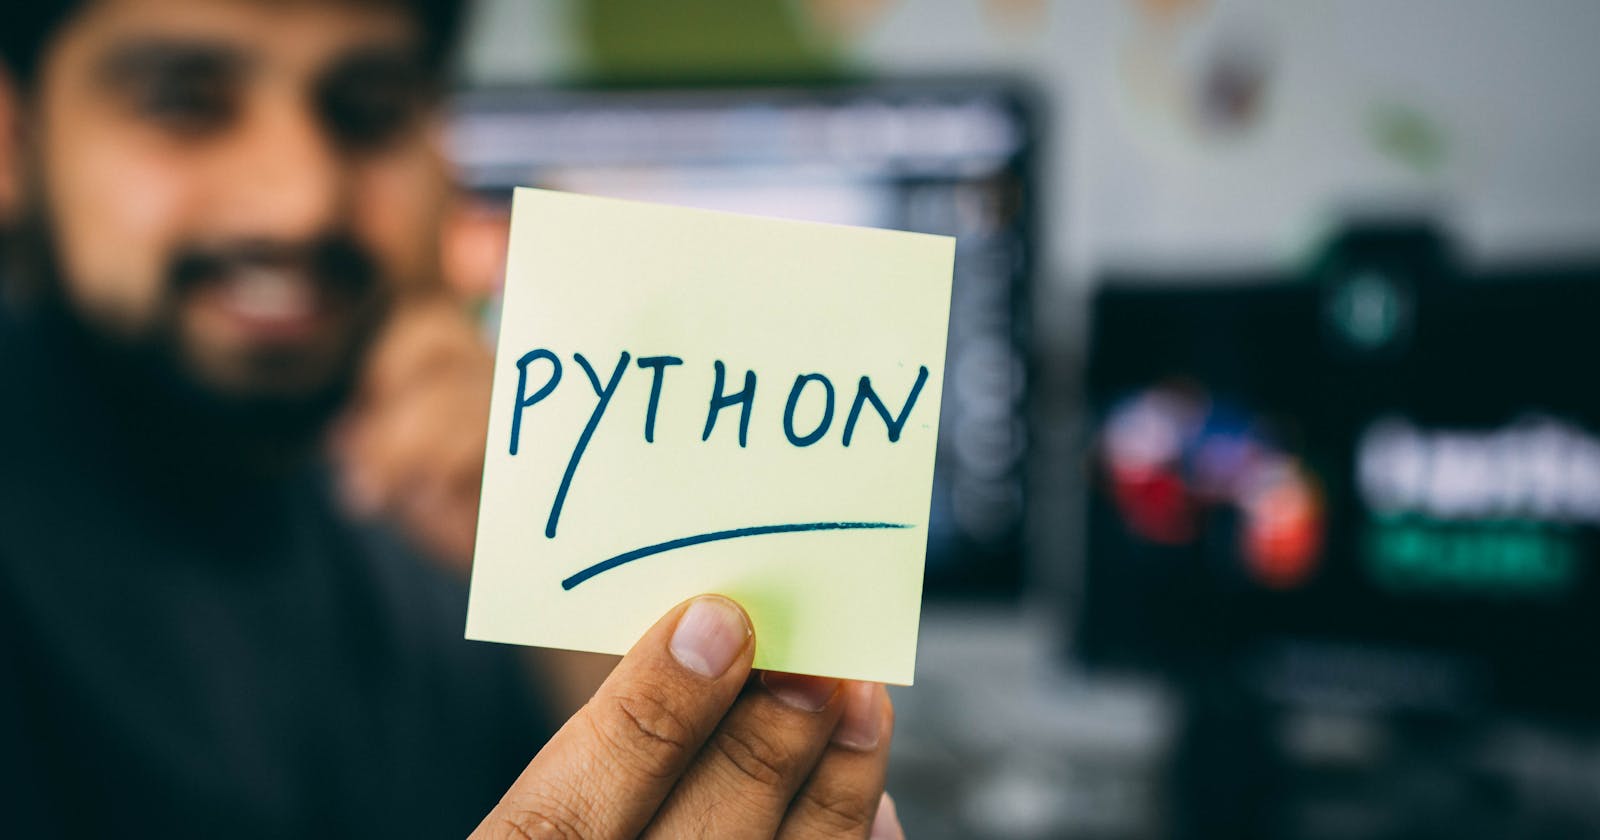 Python script to download files from a server